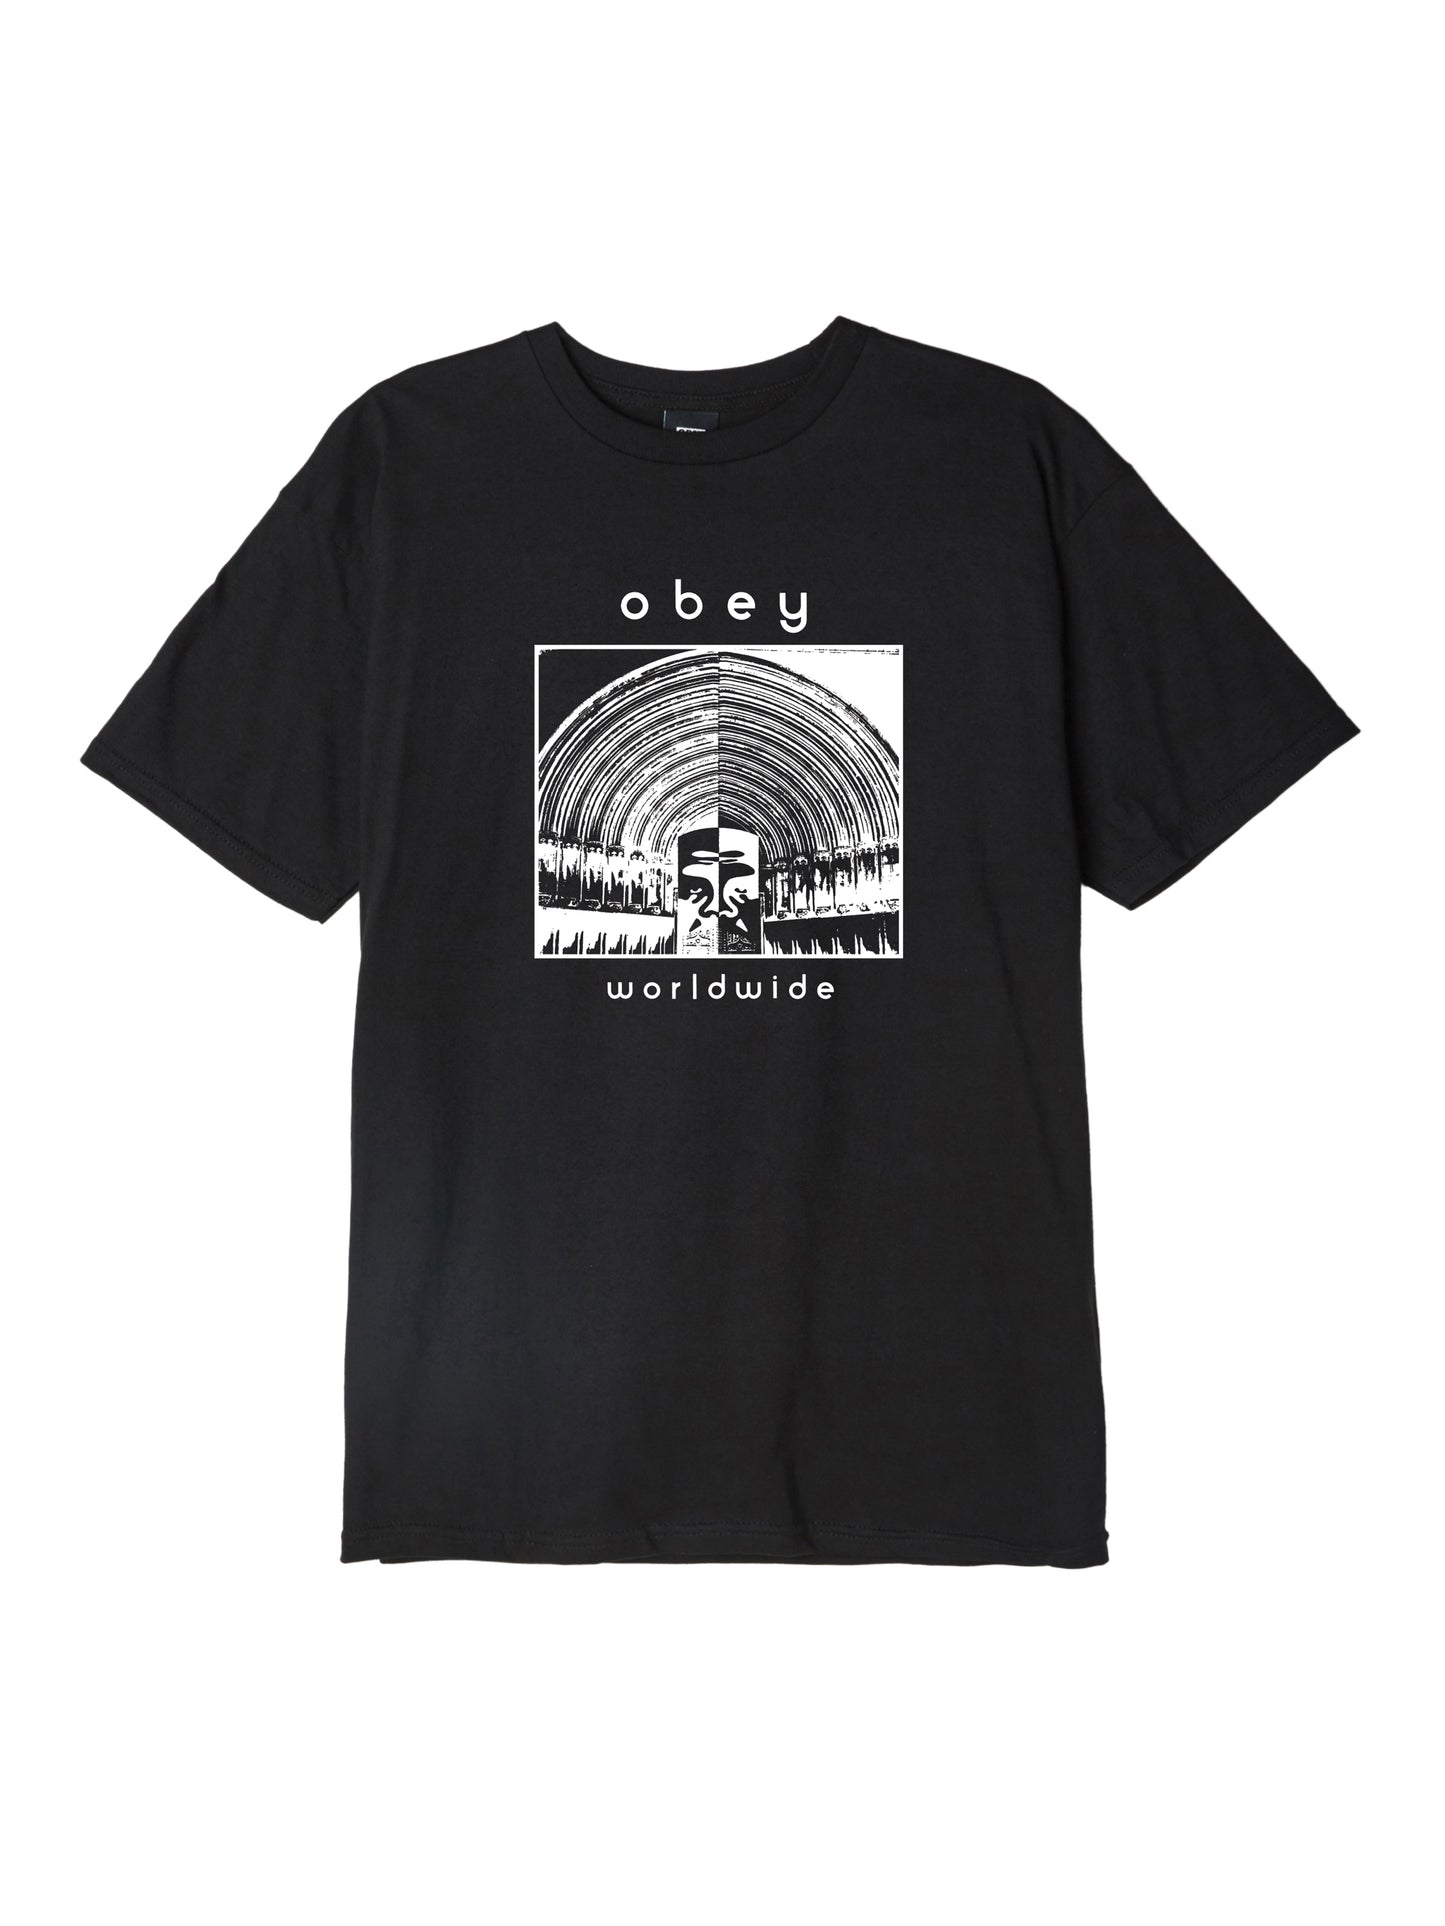 OBEY - Cathedral Men's Tee, Black